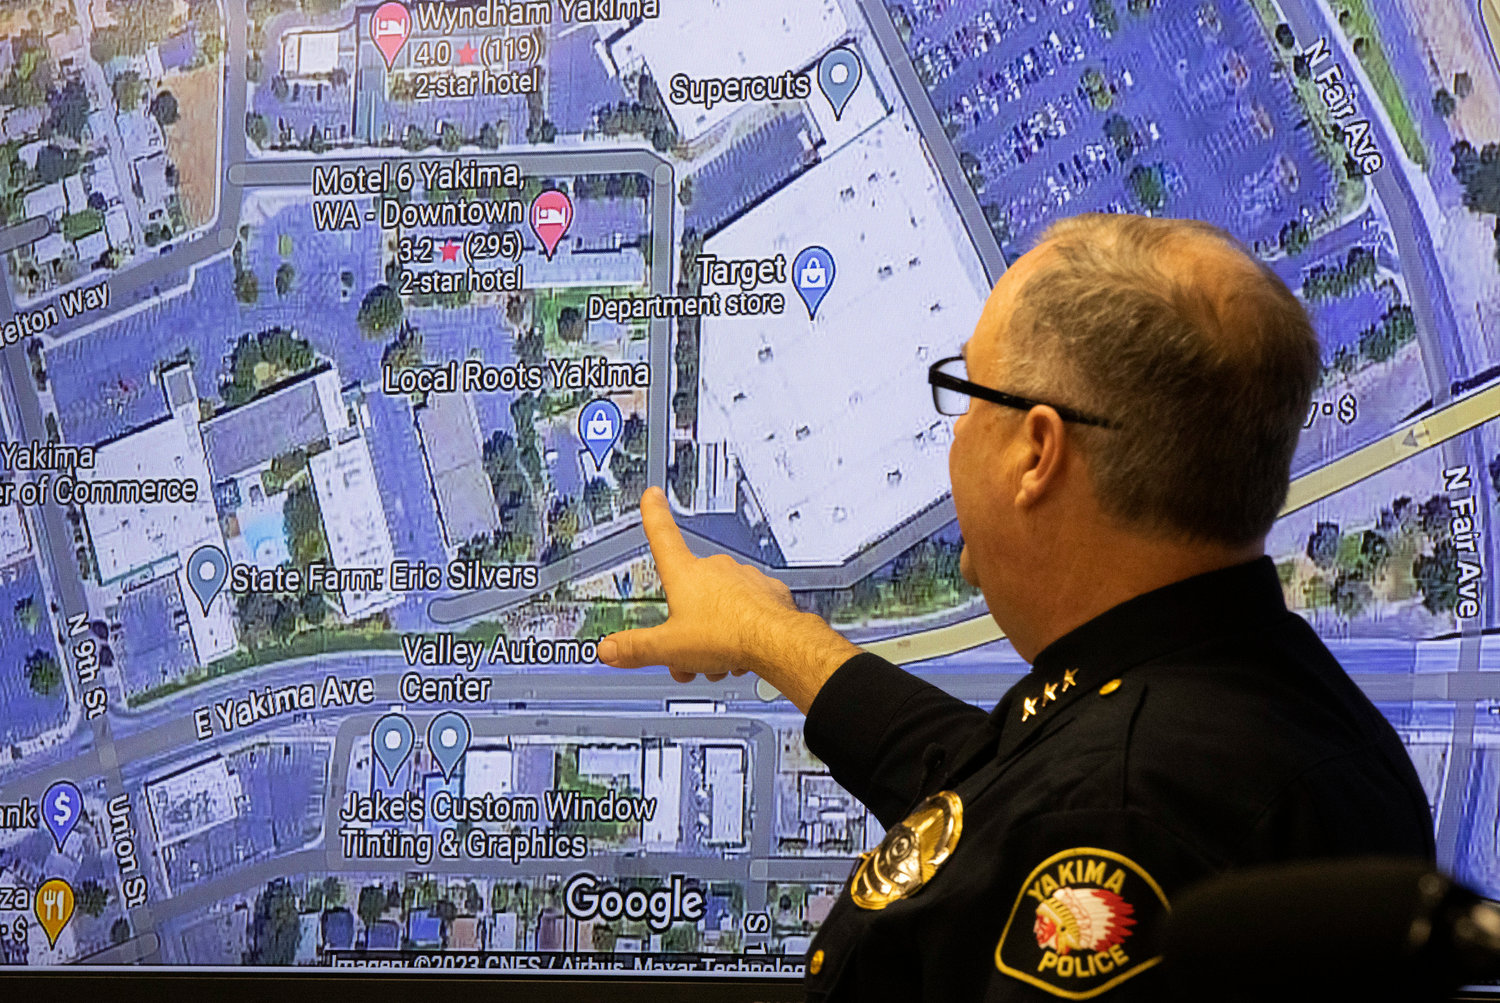 Yakima Police Chief Matt Murray points to a map showing where Jarid Haddock was found with a self-inflicted gunshot wound Tuesday, Jan. 24, in Yakima, Wash. Police located Haddock, the suspect in the random killing of three people at a convenience store in Yakima, after he borrowed a stranger’s cell phone to call his mother and confess to what he had done.